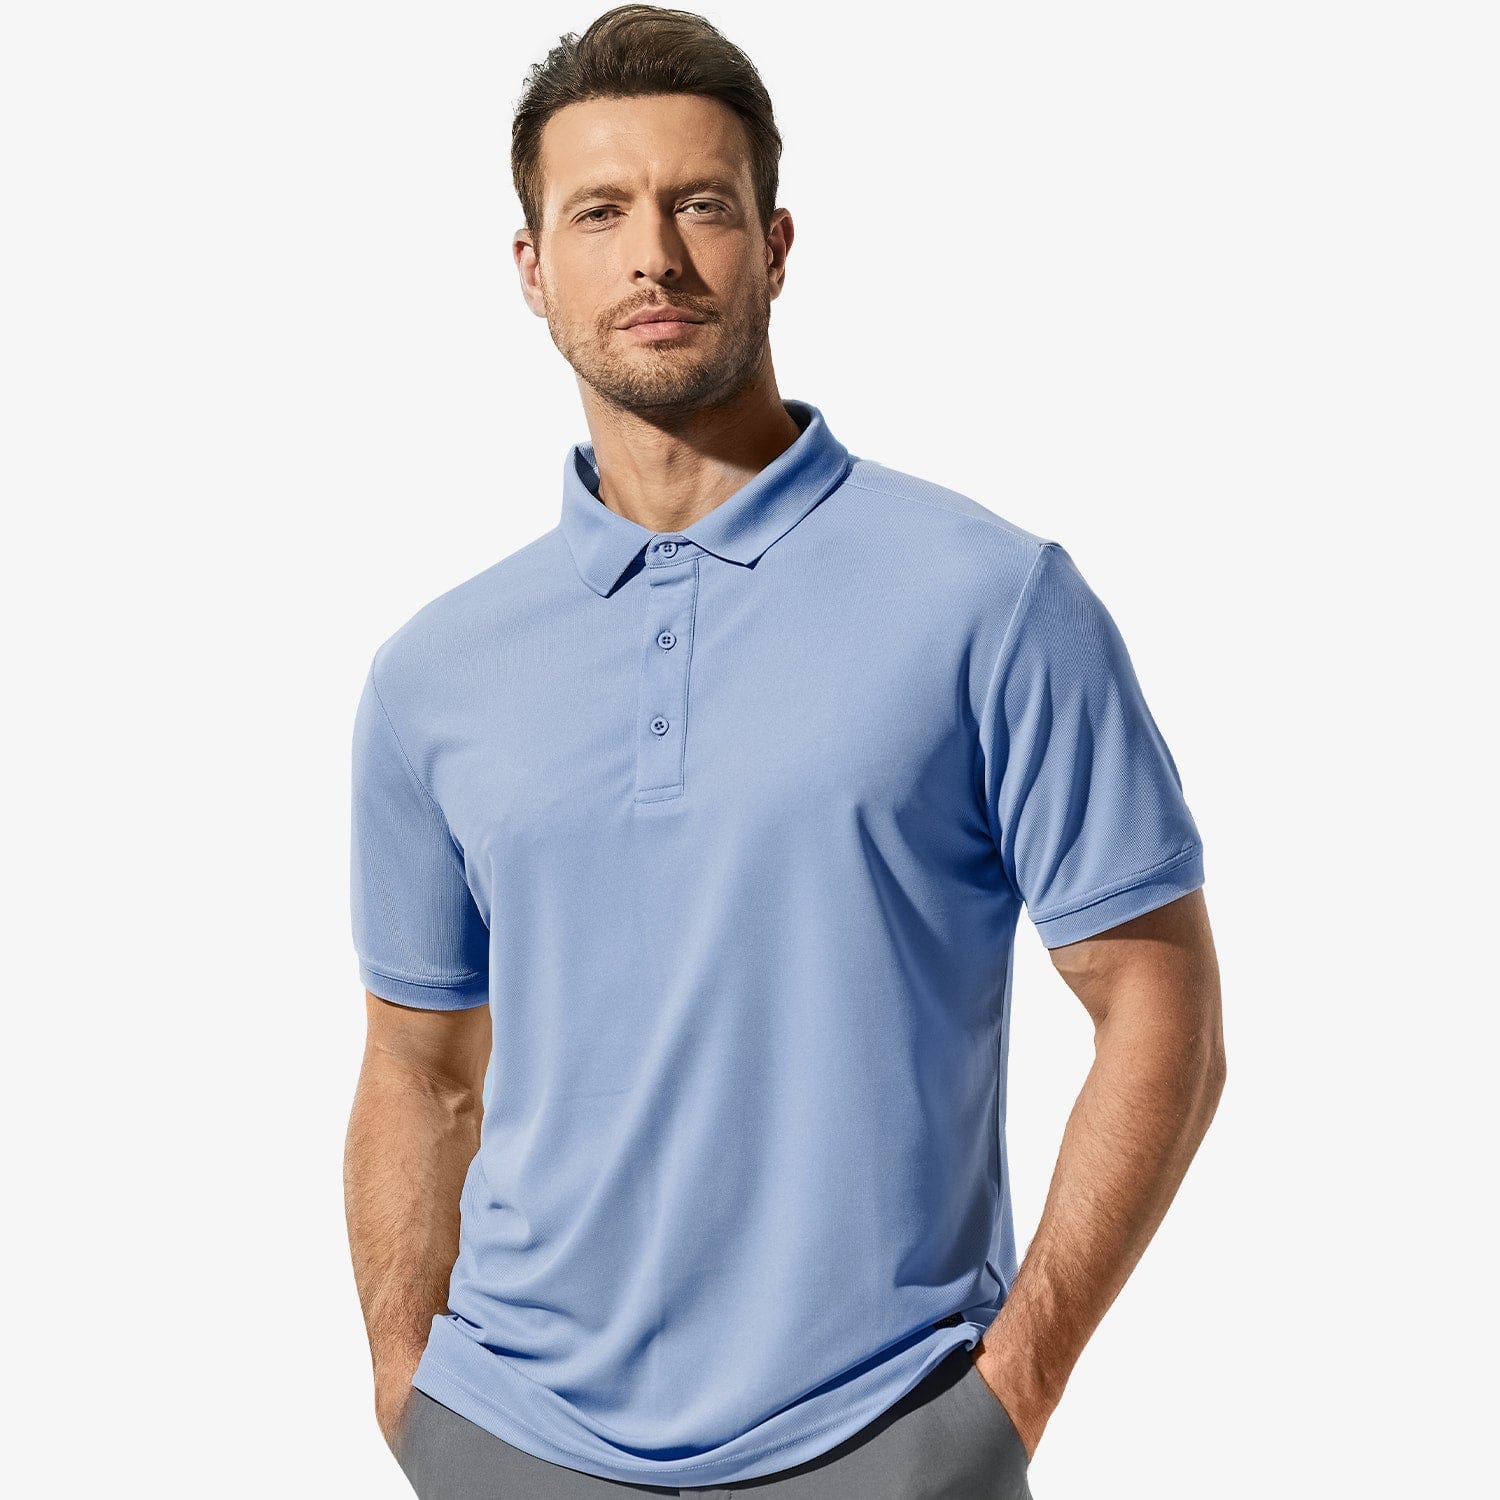 Men Golf Polo Shirts Regular-fit Fashion Casual Collared T-Shirts Men Polo Light Blue / S MIER